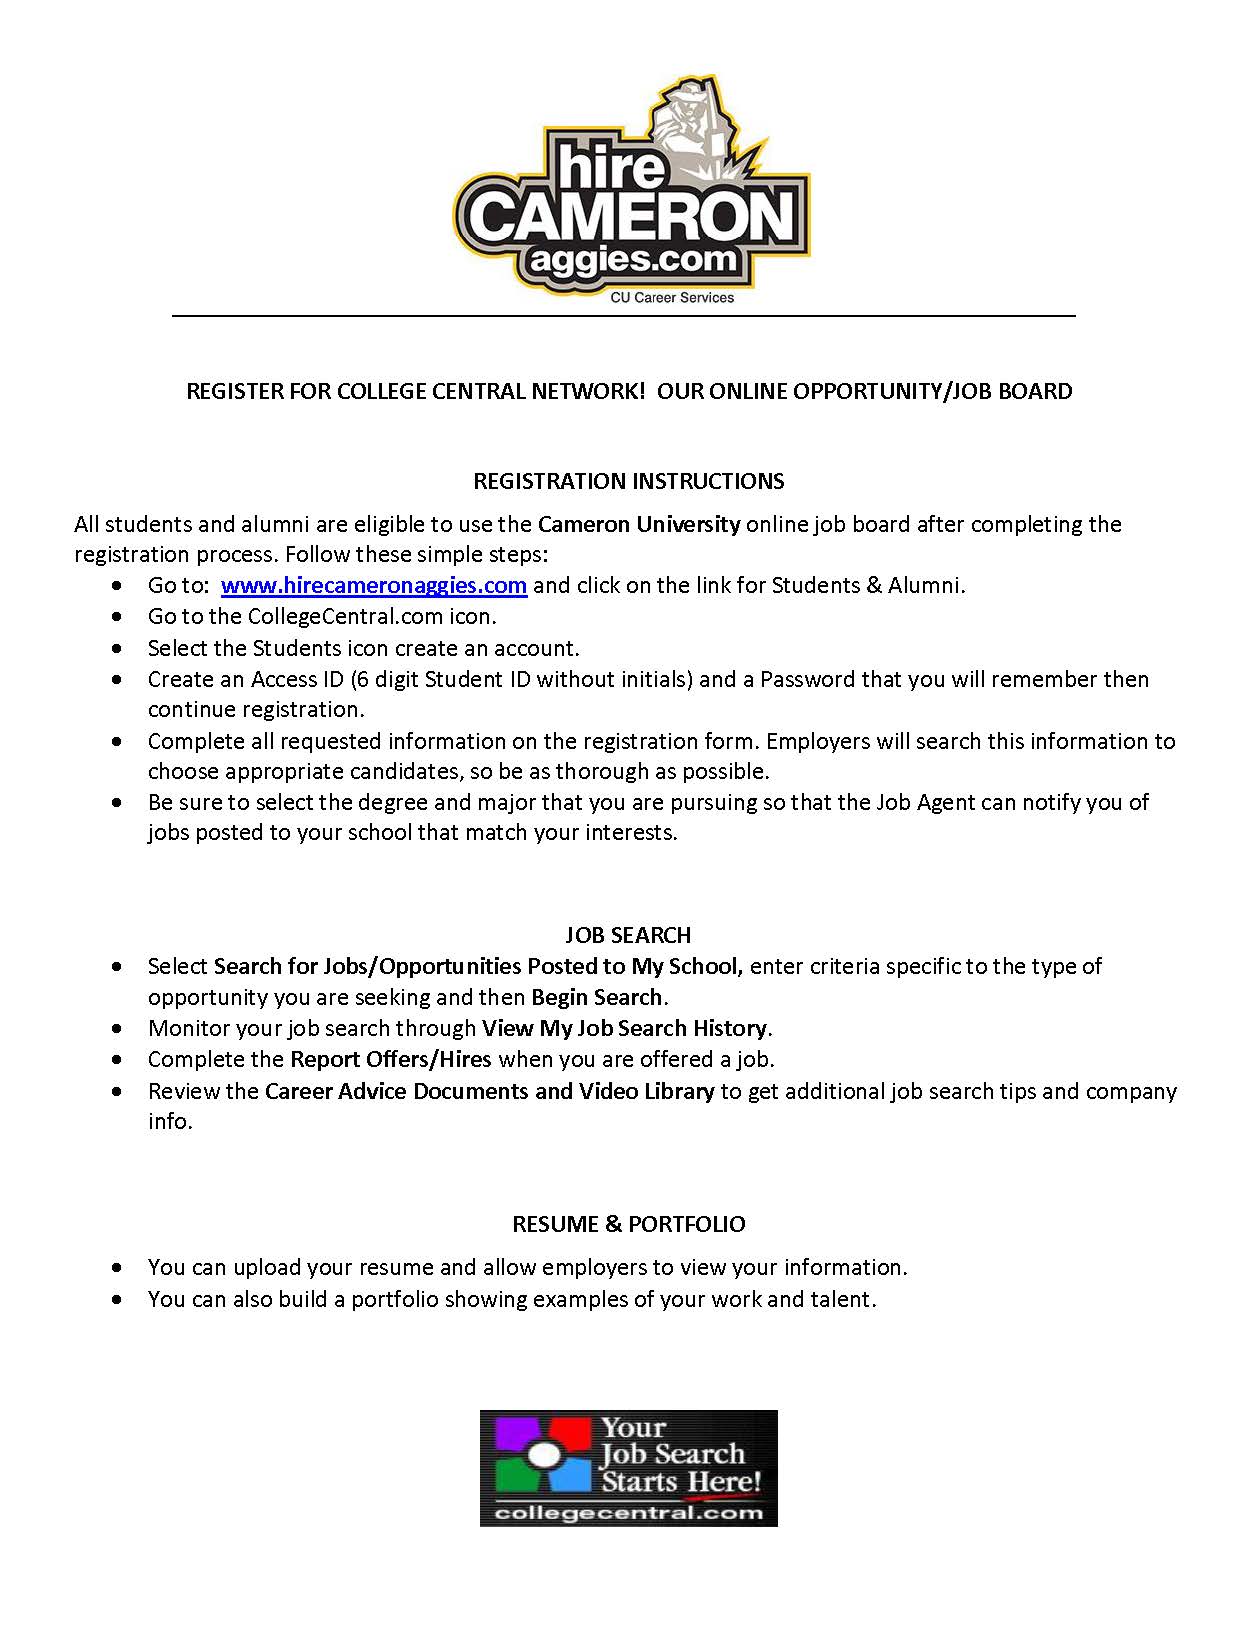 Hire Cameron Aggies College Central Network 